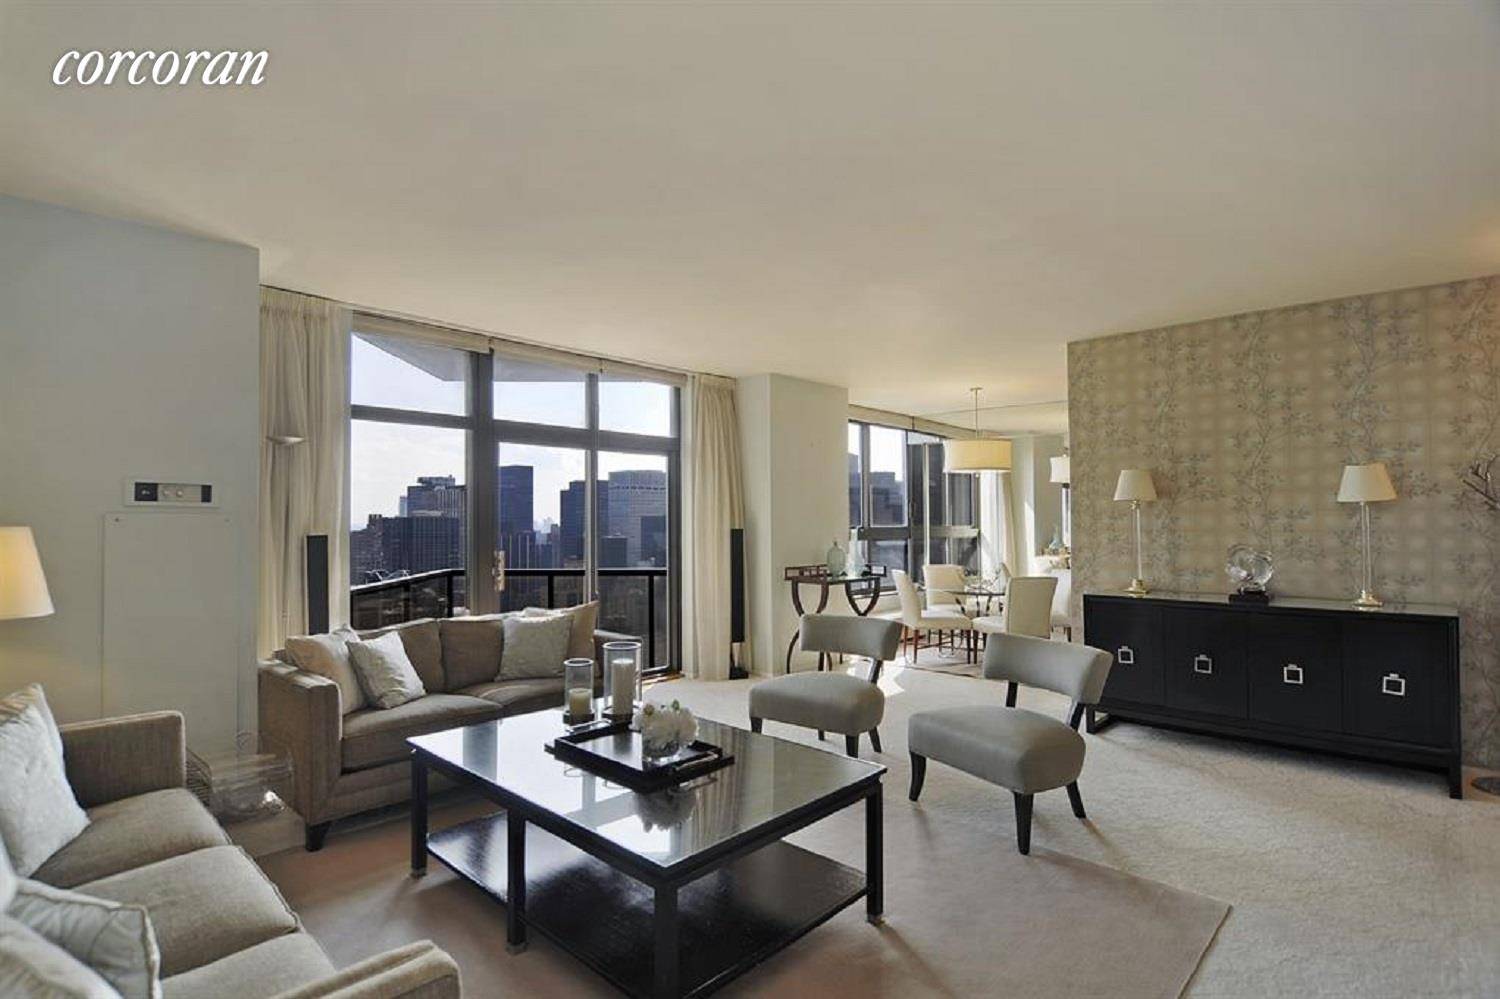 Penthouse 46B is a south facing 2 bedroom, 2.